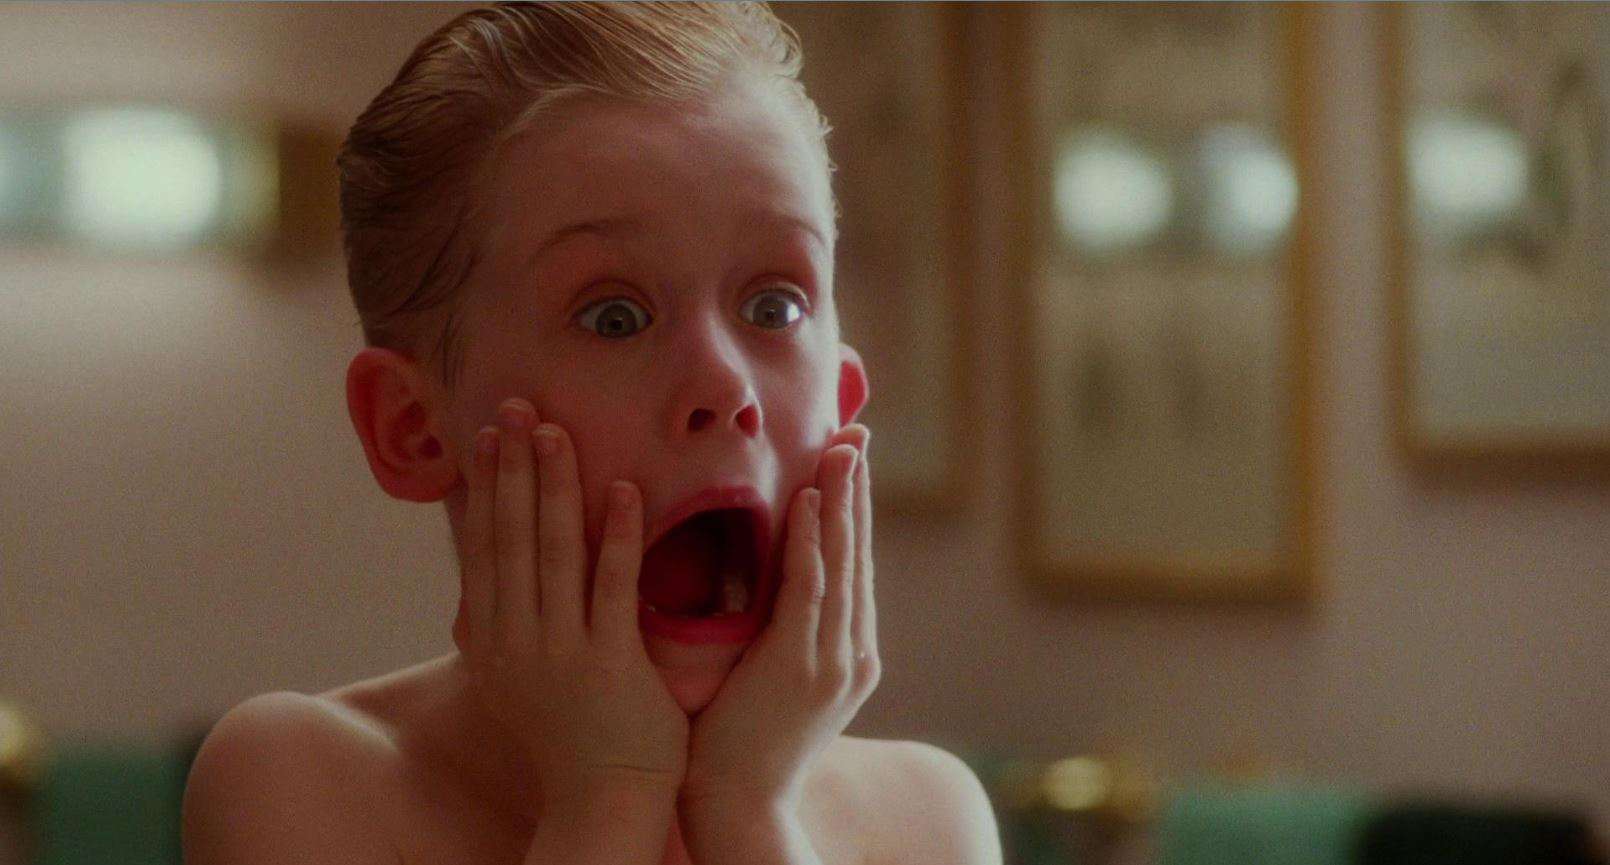 Kevin McCallister doing his signature scream with both hands on his face